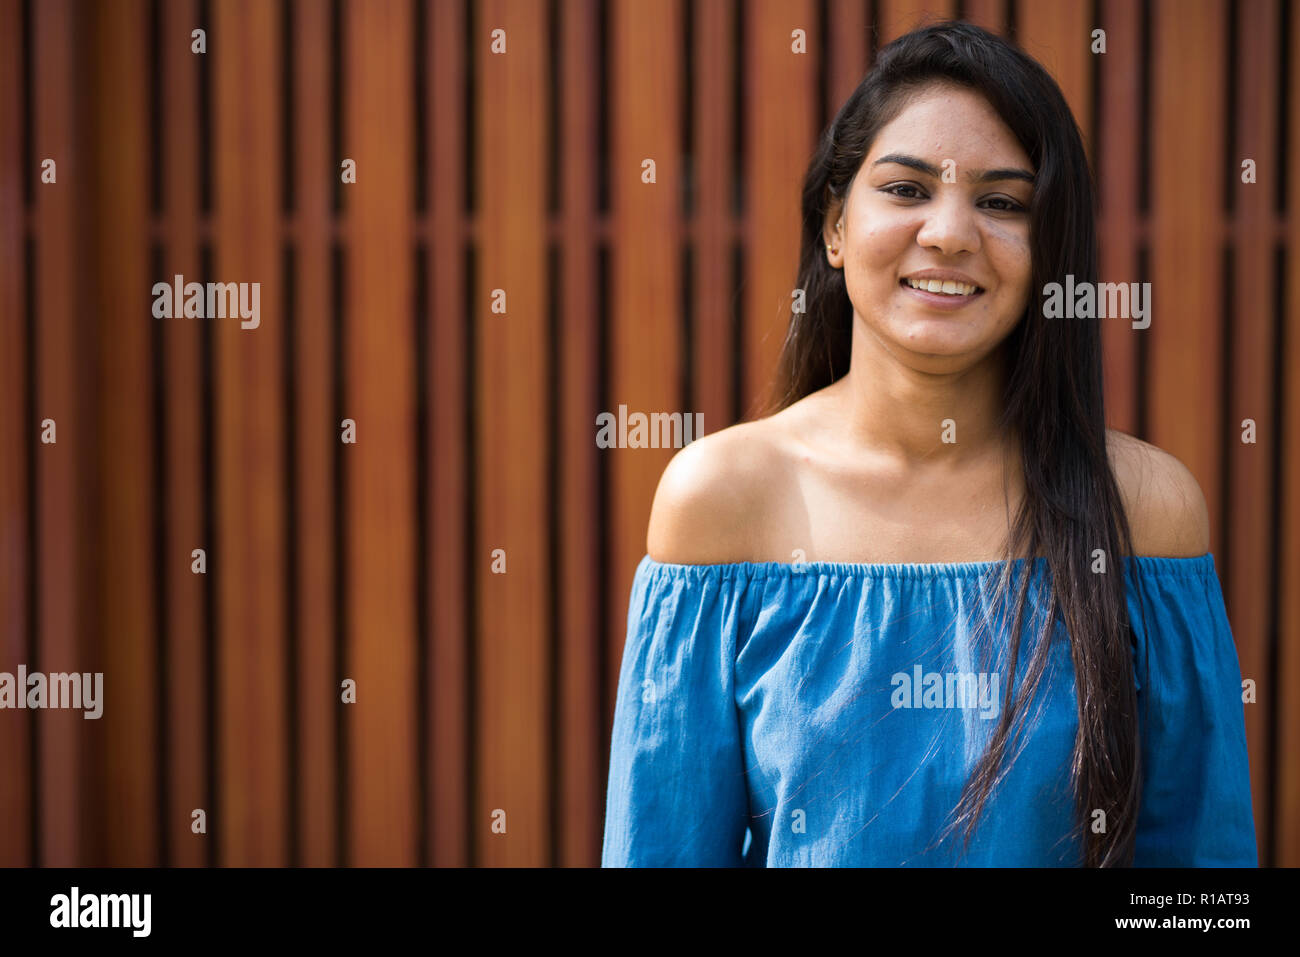 Portrait of young happy Indian woman smiling outdoors Stock Photo